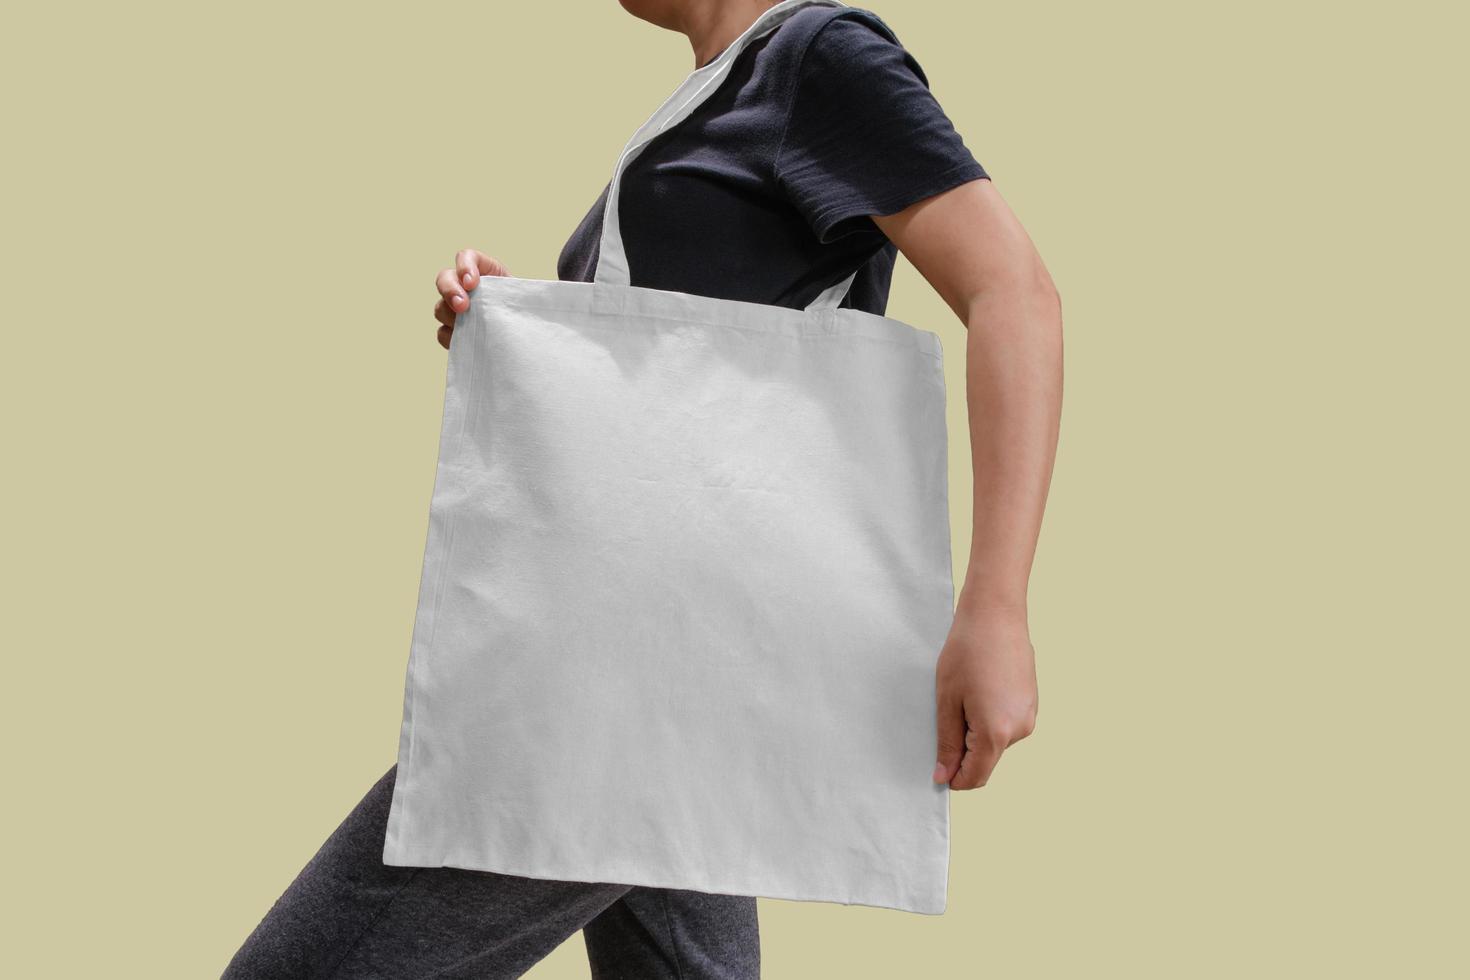 Woman holding fabric tote bag for mockup photo